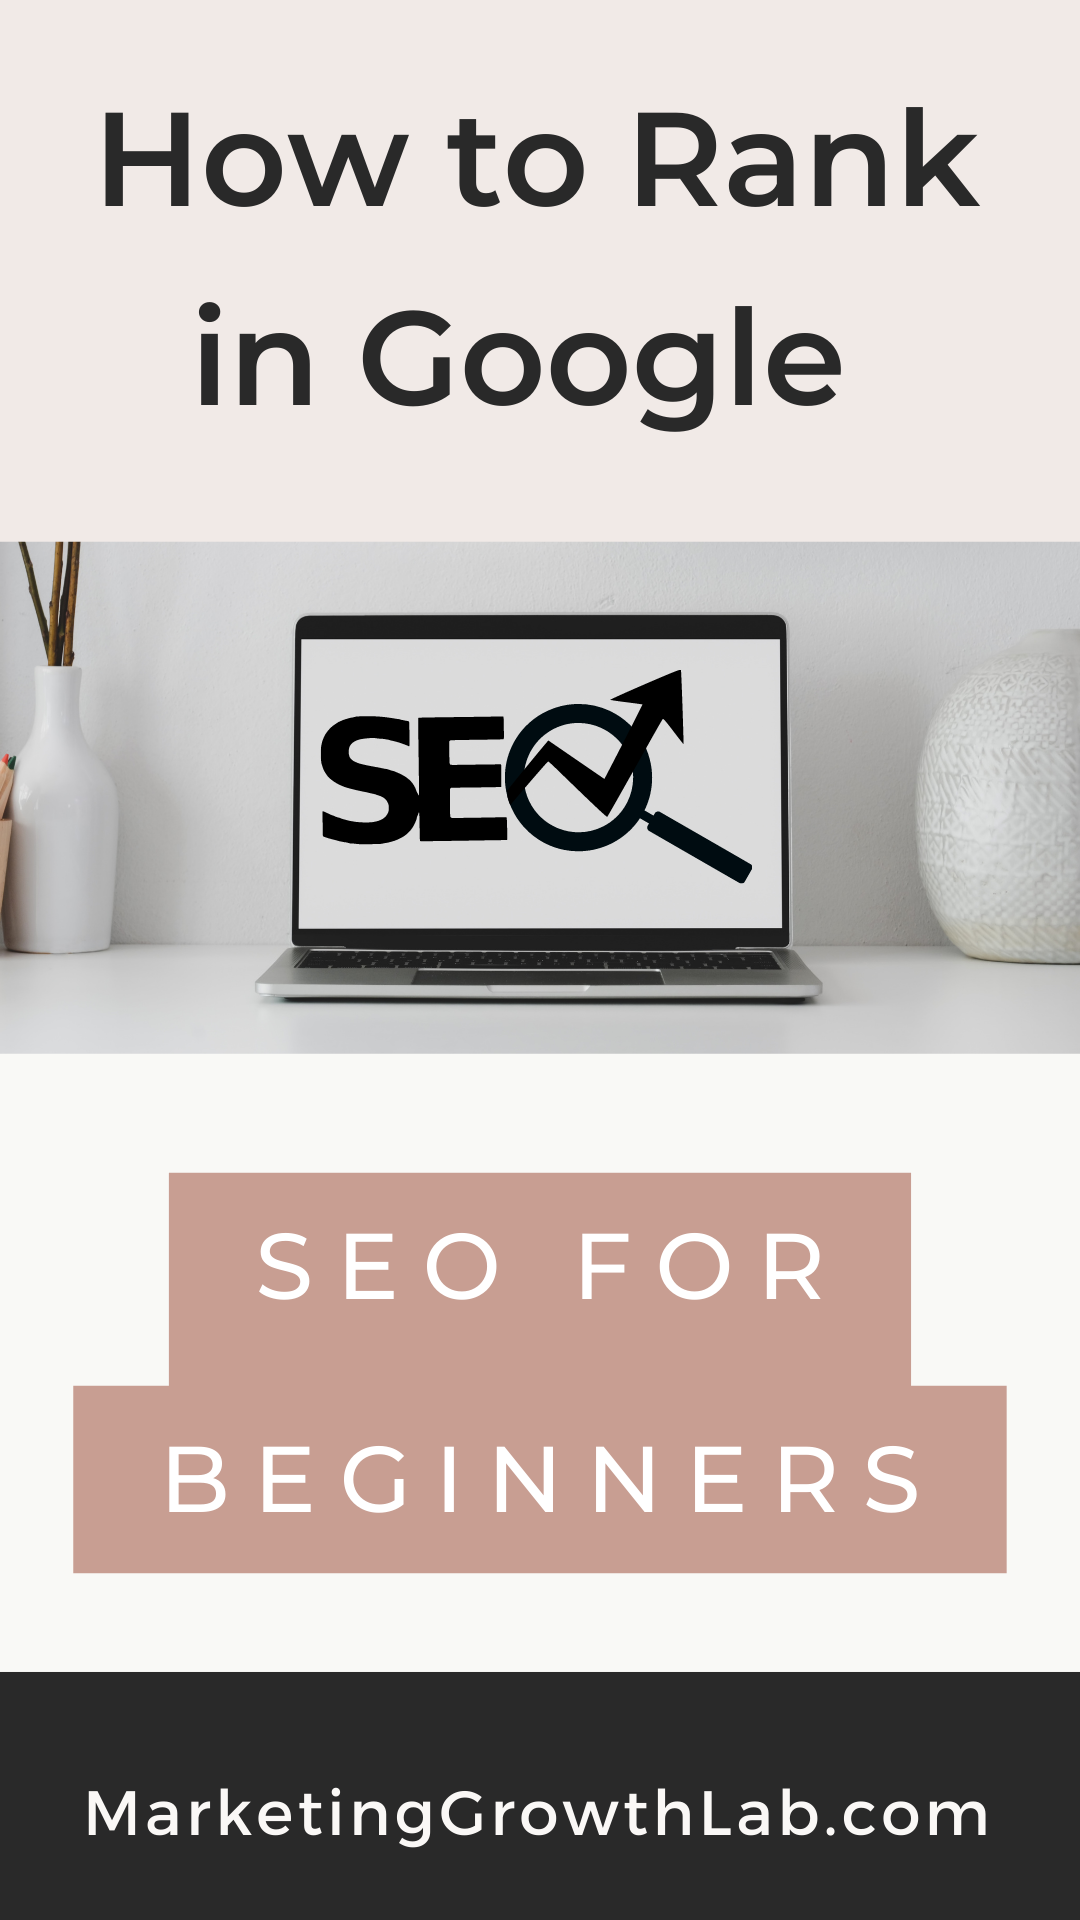 SEO For beginners: how to rank in google